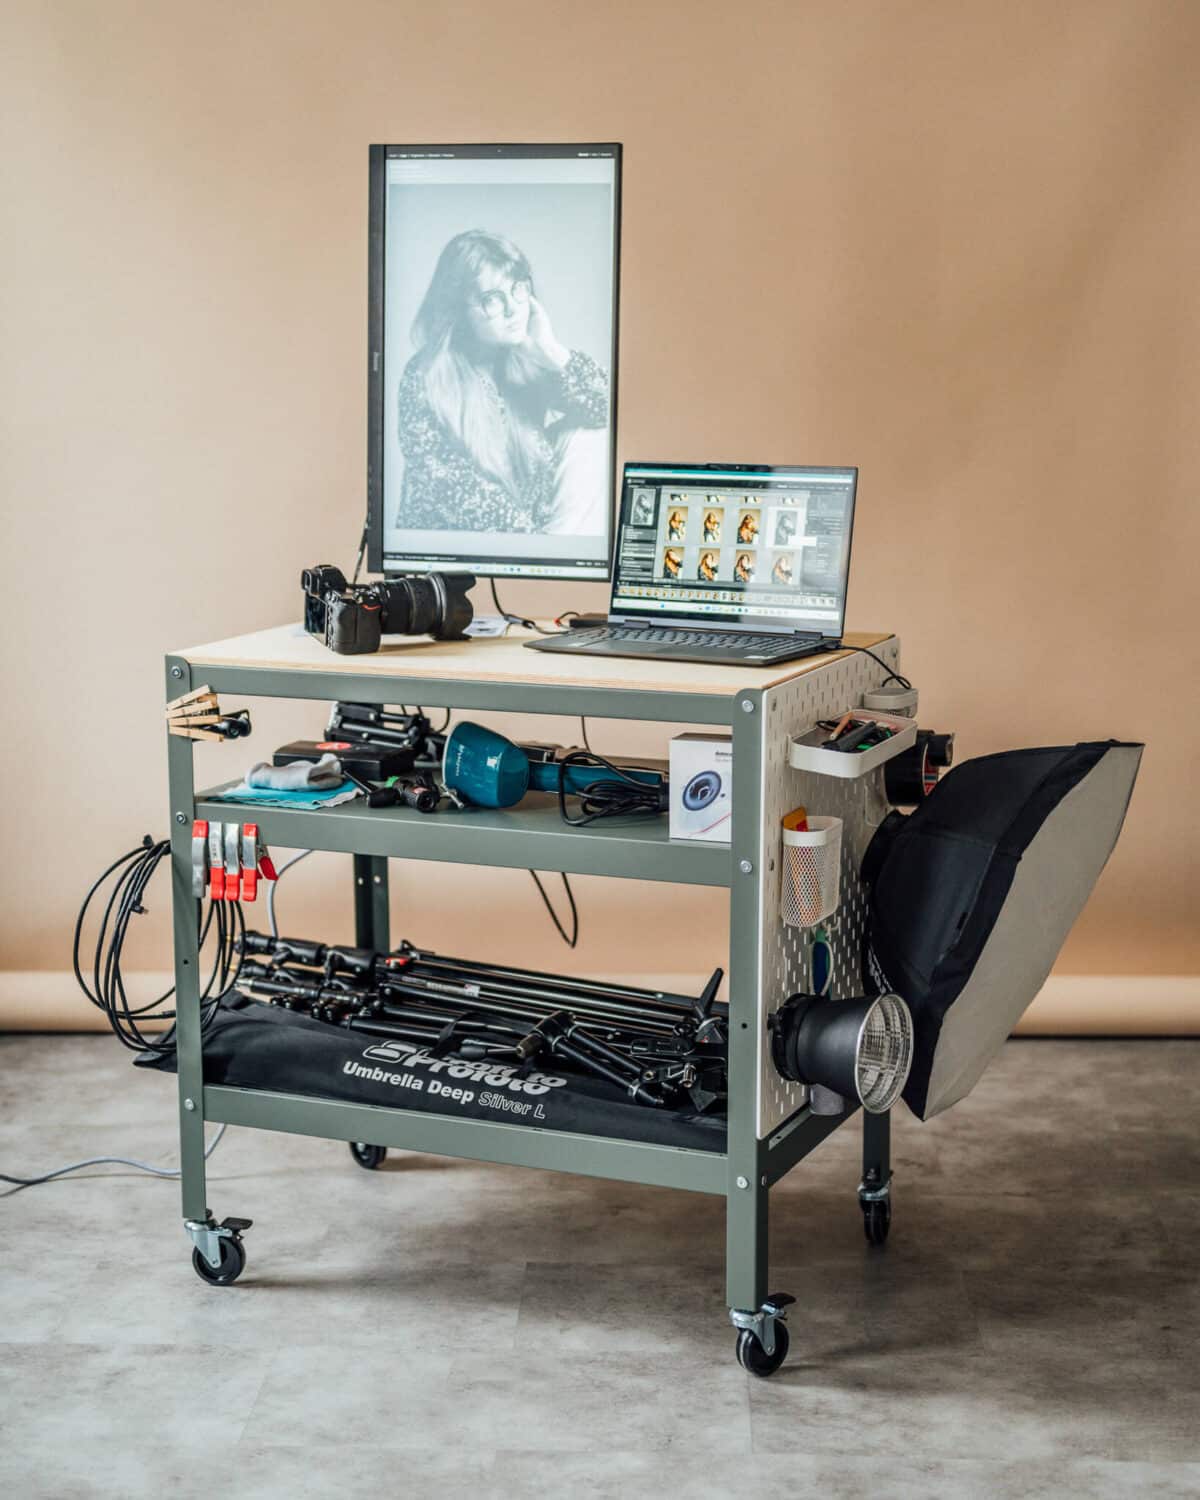 Photography tether table and cart from IKEA parts